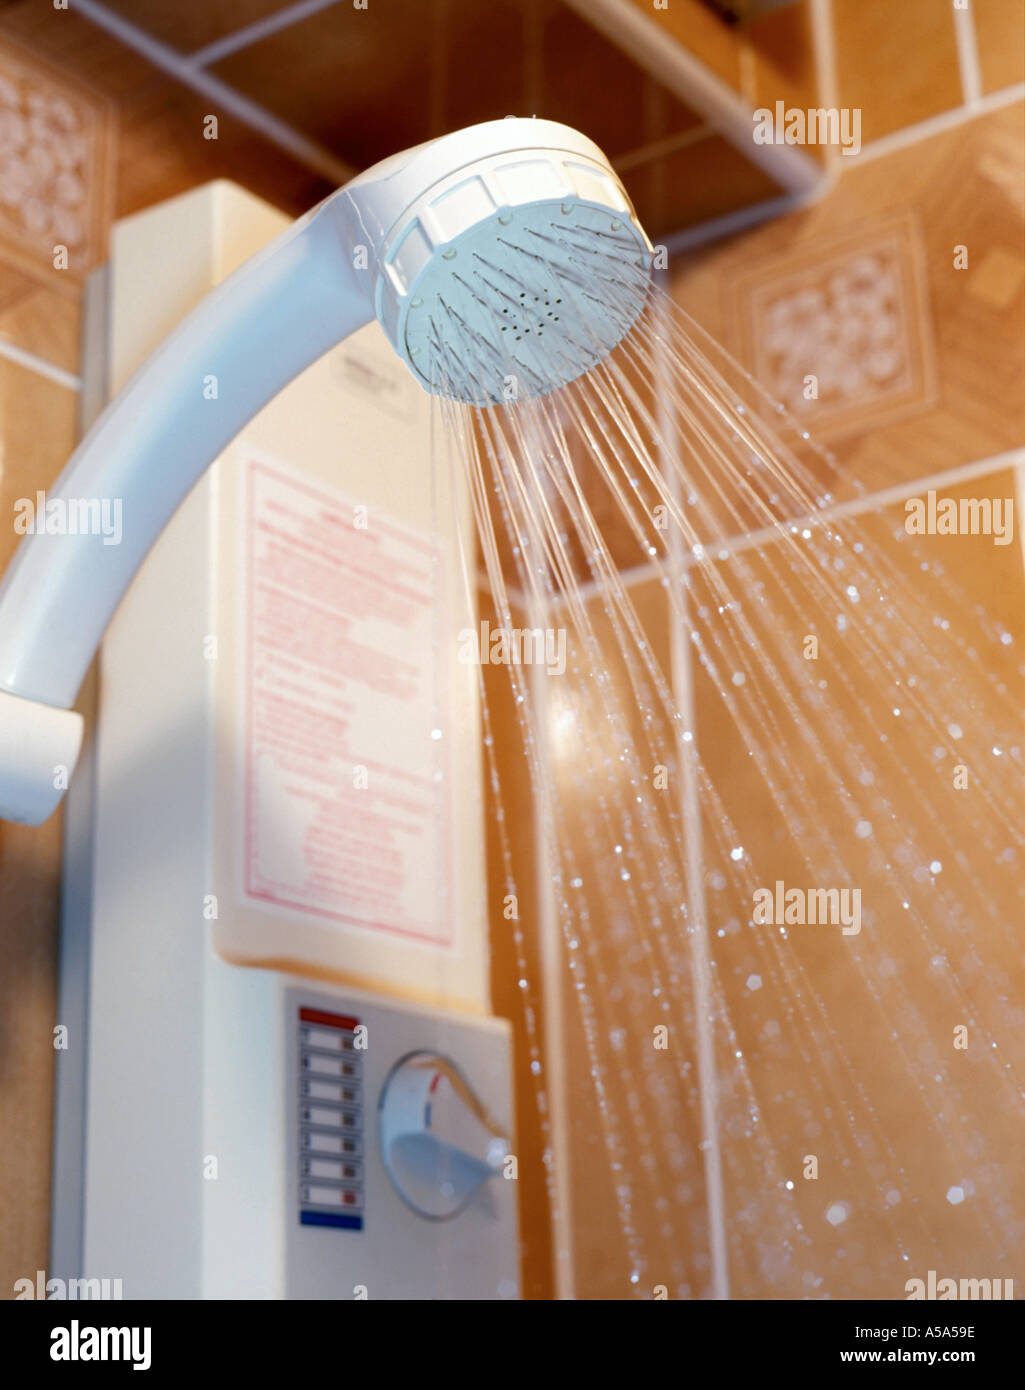 Domestic shower head with pump and water flow temperature control box beyond, UK Stock Photo